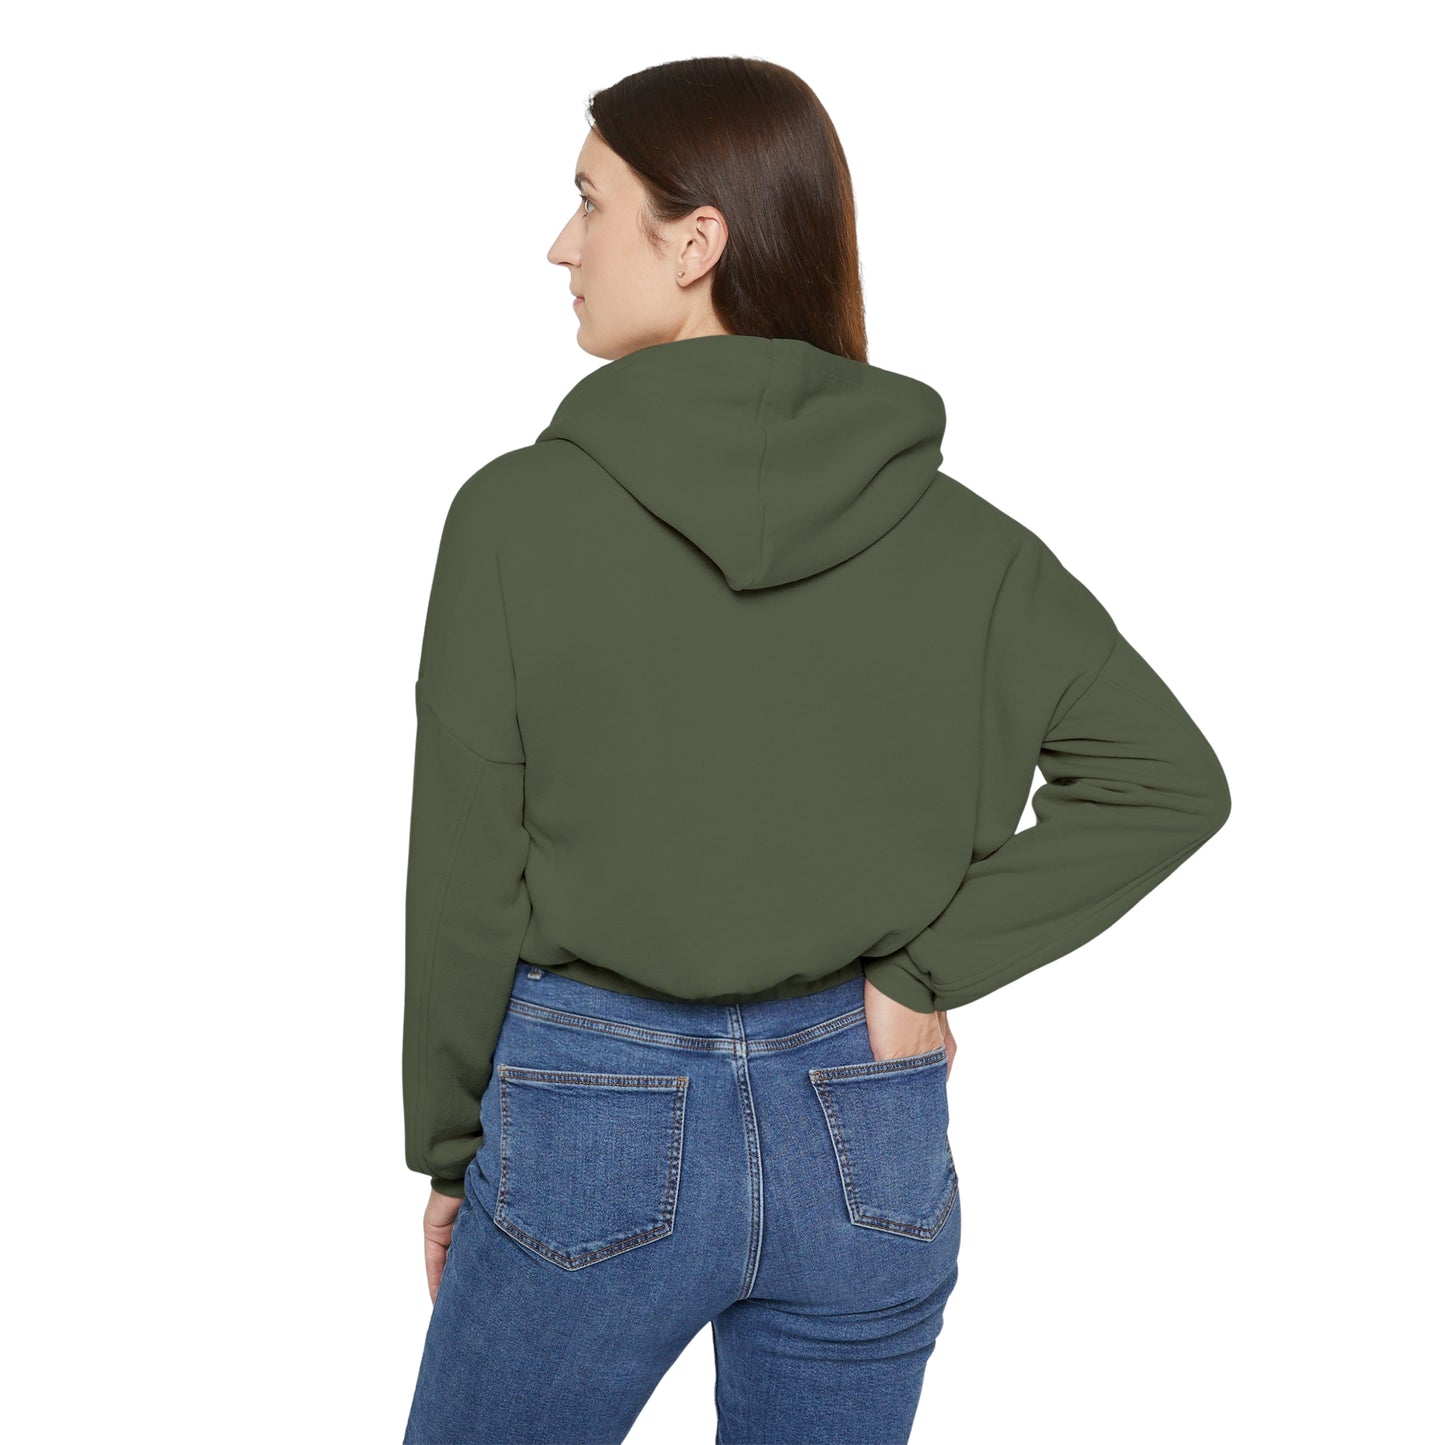 I Luv You. Women's Cinched Bottom Hoodie